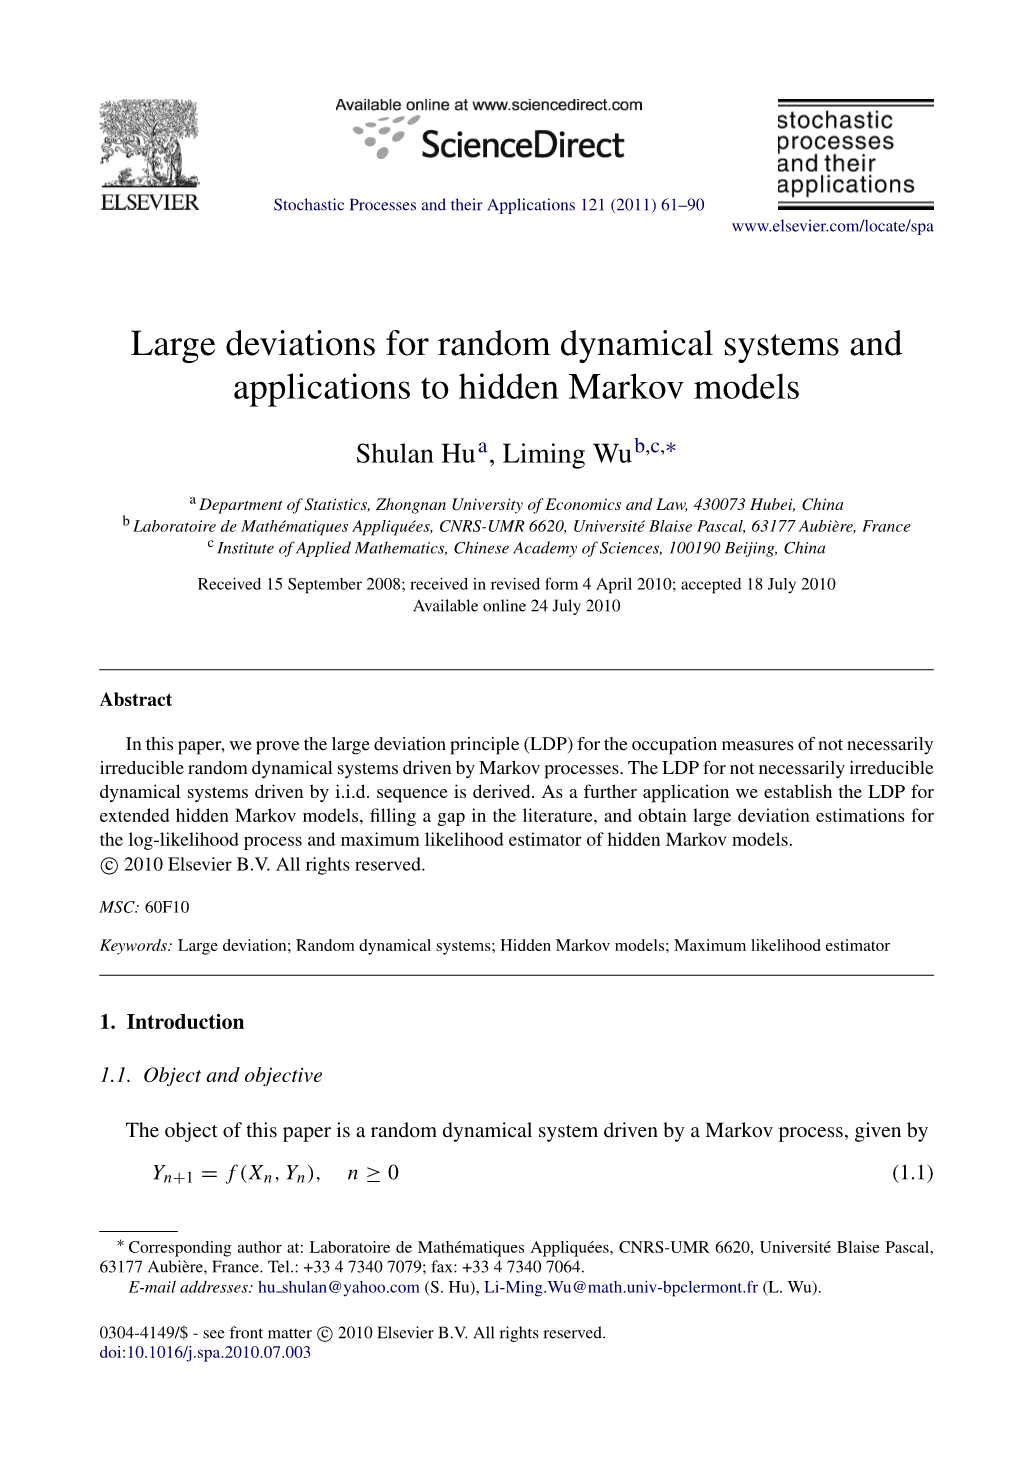 Large Deviations for Random Dynamical Systems and Applications to Hidden Markov Models